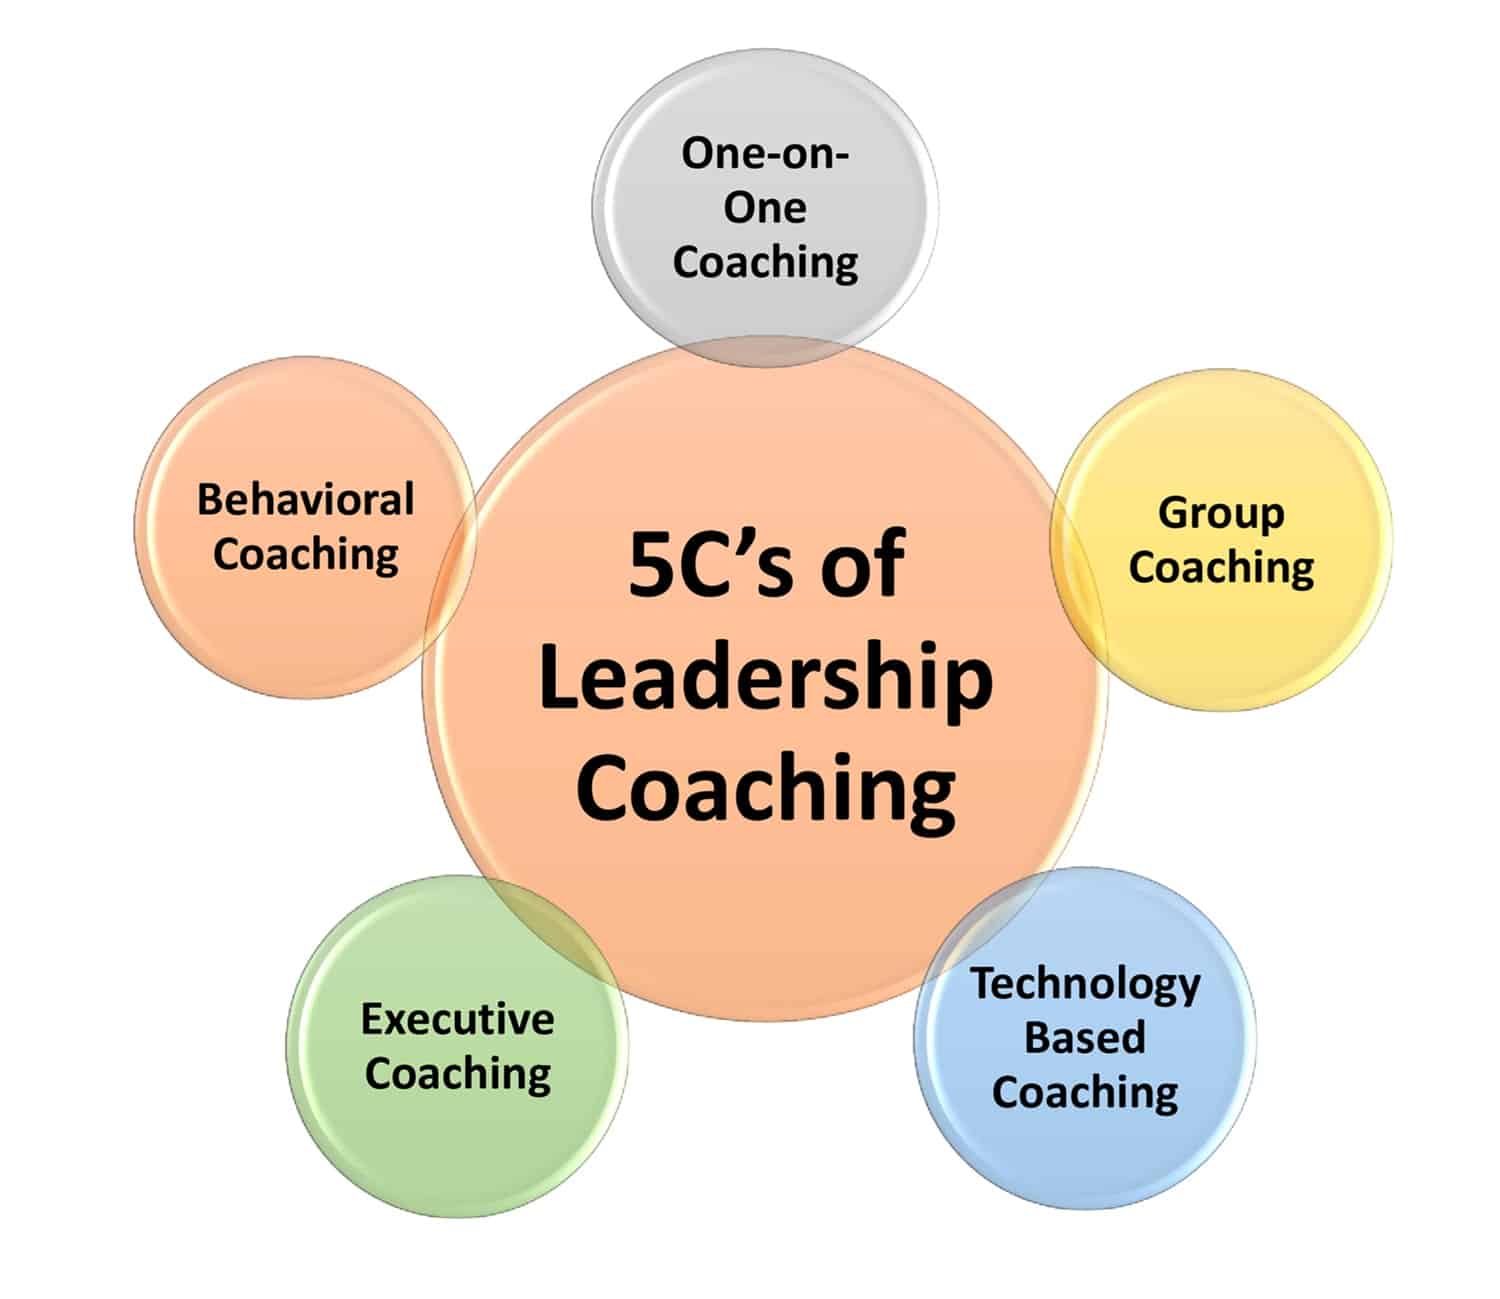 What are the 5C’s of Leadership Coaching?